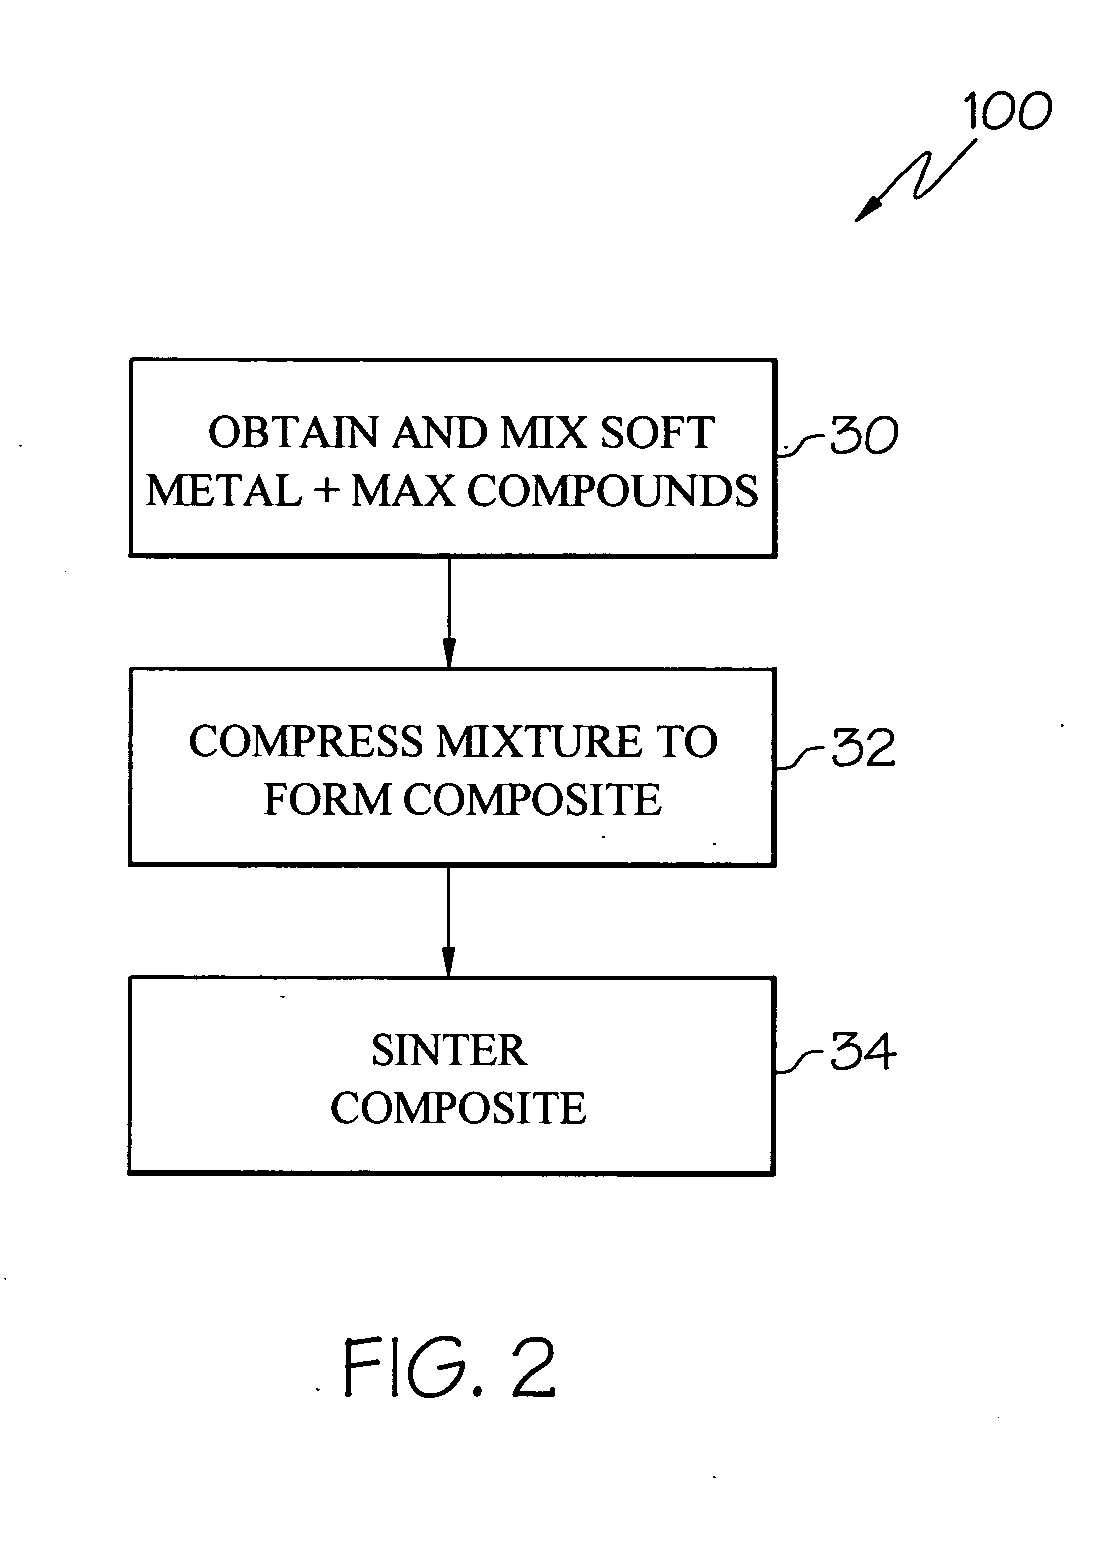 Ternary carbide and nitride composites having tribological applications and methods of making same